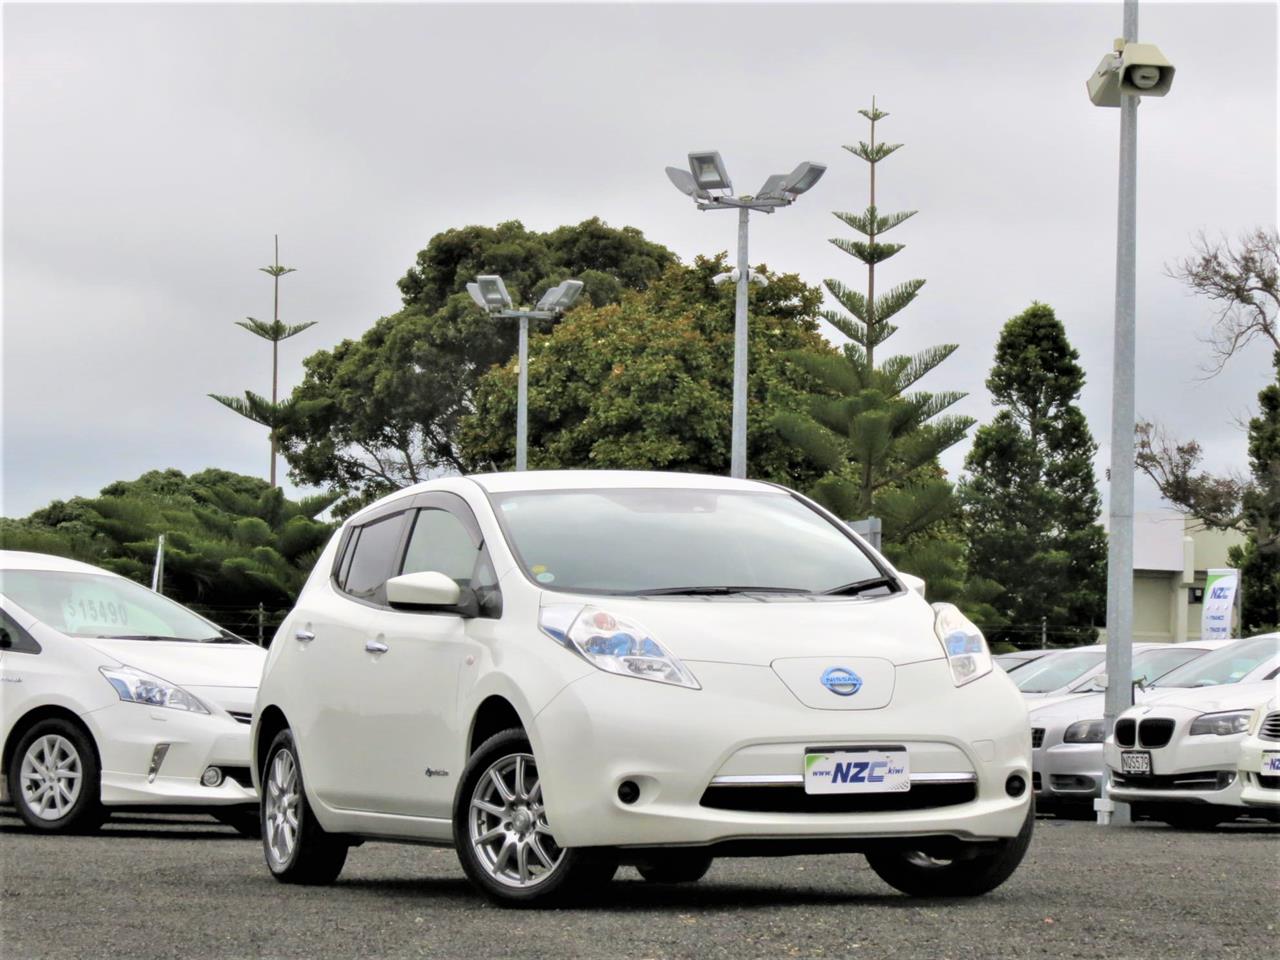 NZC best hot price for 2017 Nissan Leaf in Auckland